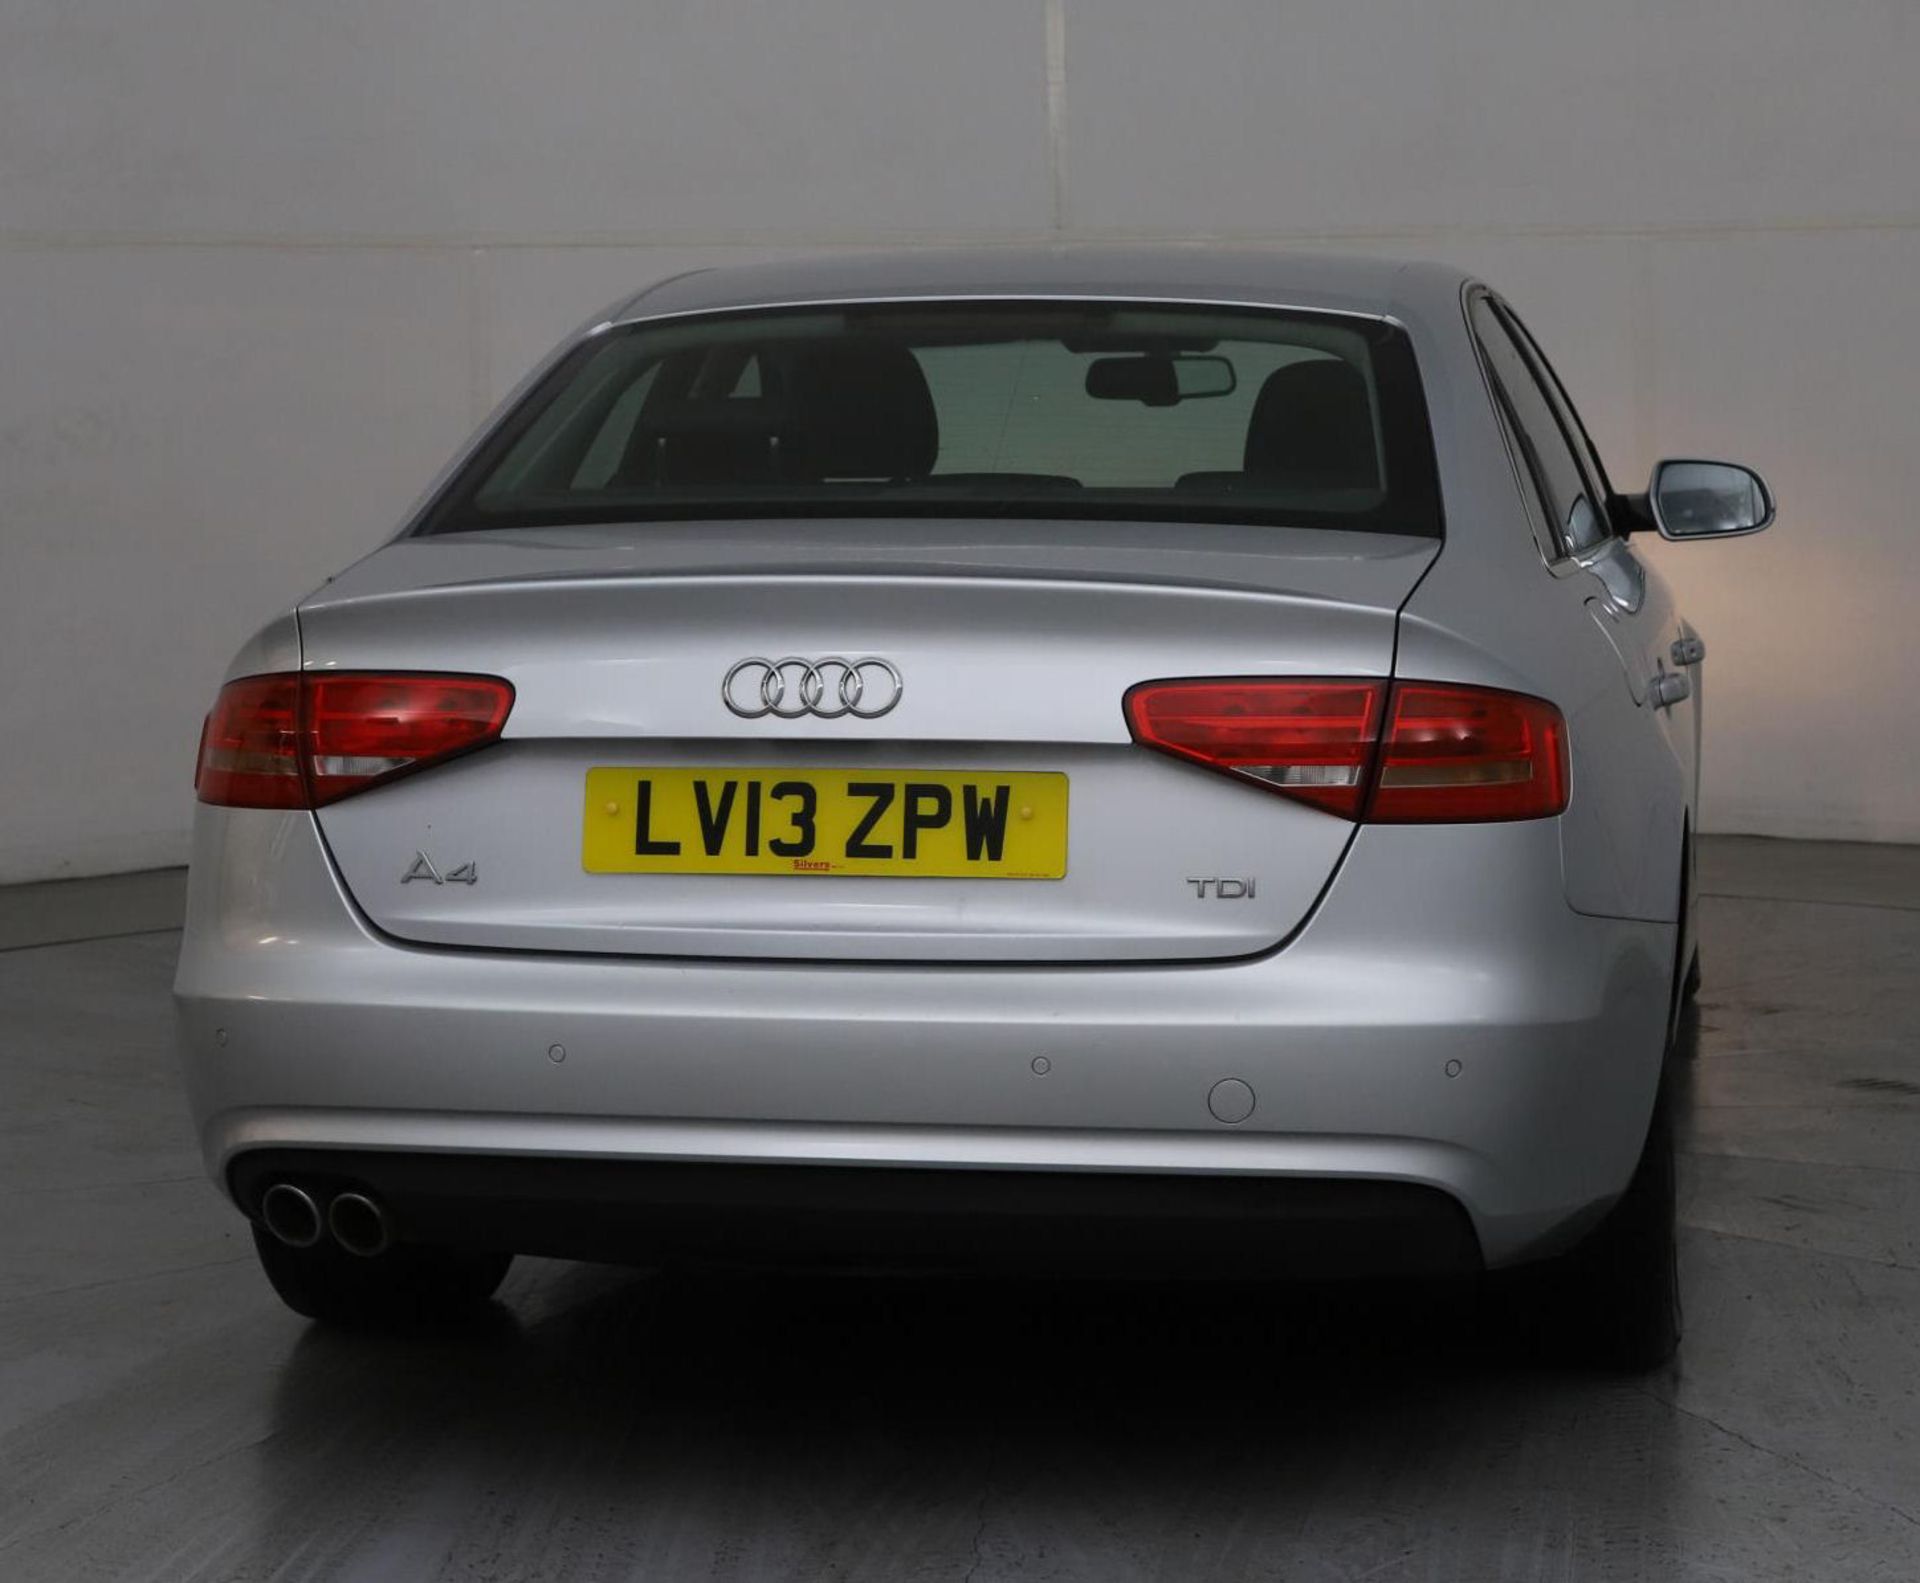 2013 Audi A4 2.0 Tdi SE 4 Door Saloon - CL505 - NO VAT ON THE HAMMER - Location: Corby - Image 5 of 12